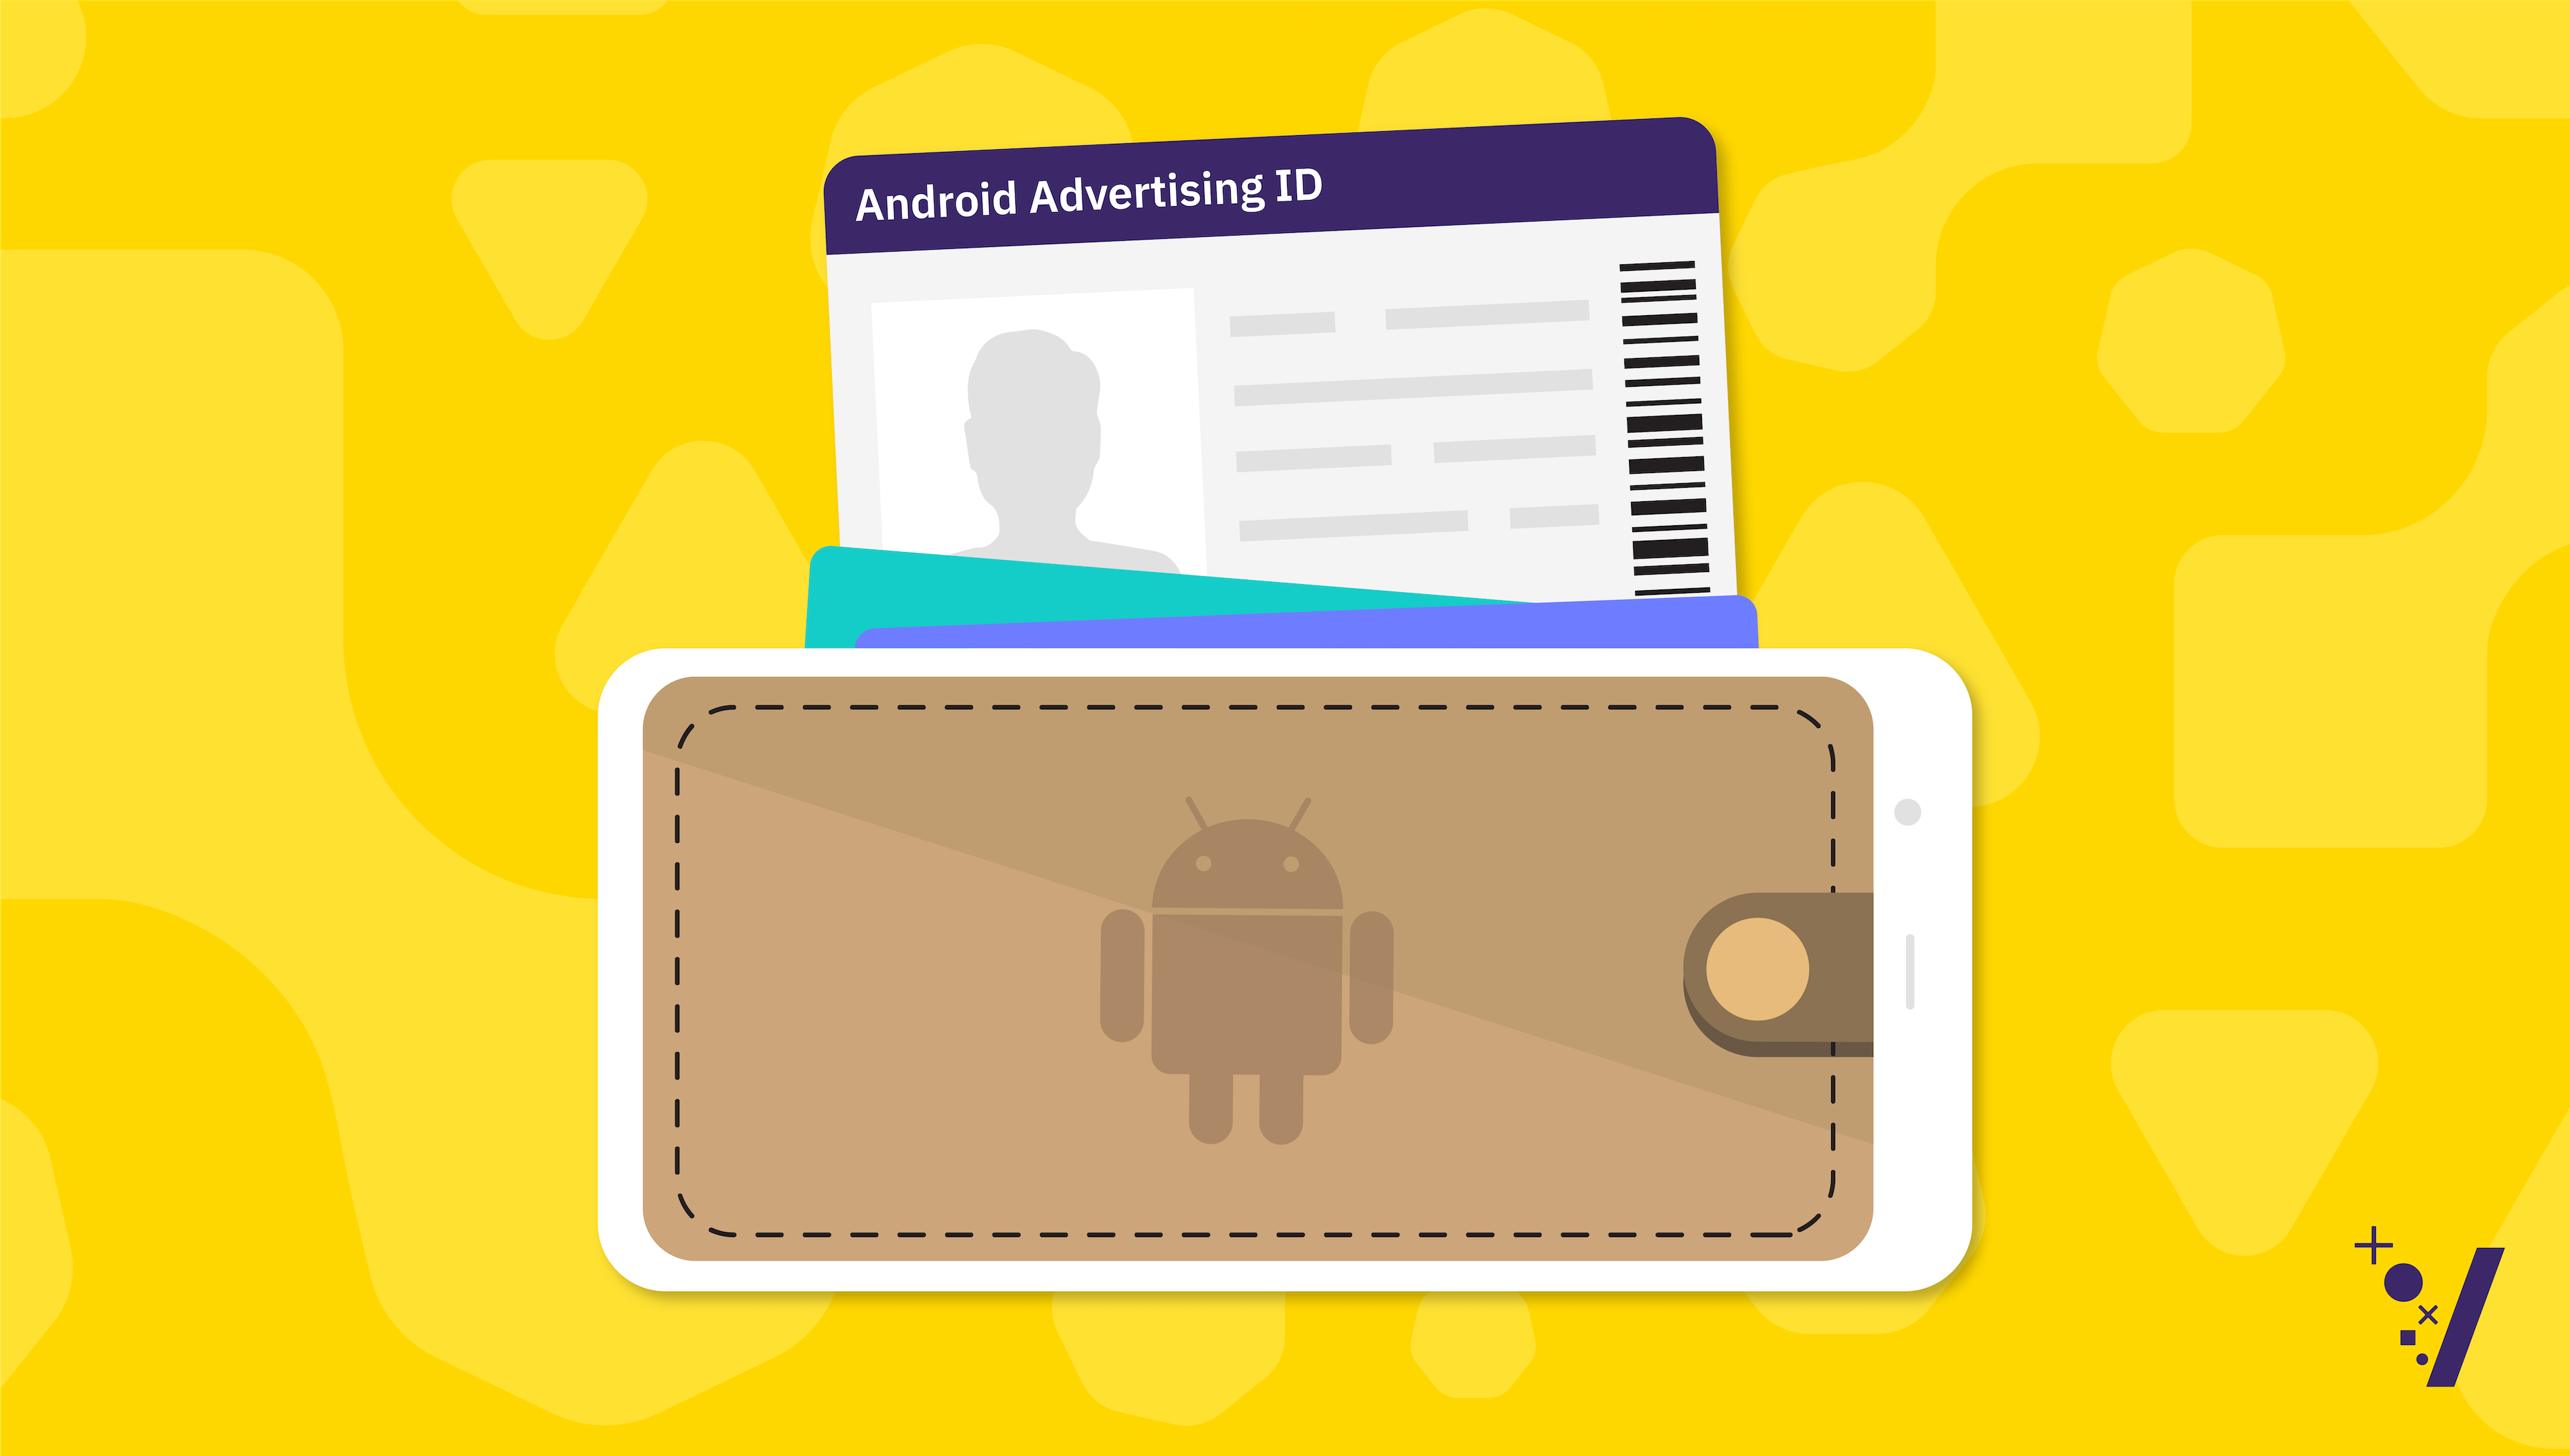 What Is Android Advertising ID (AAID)?